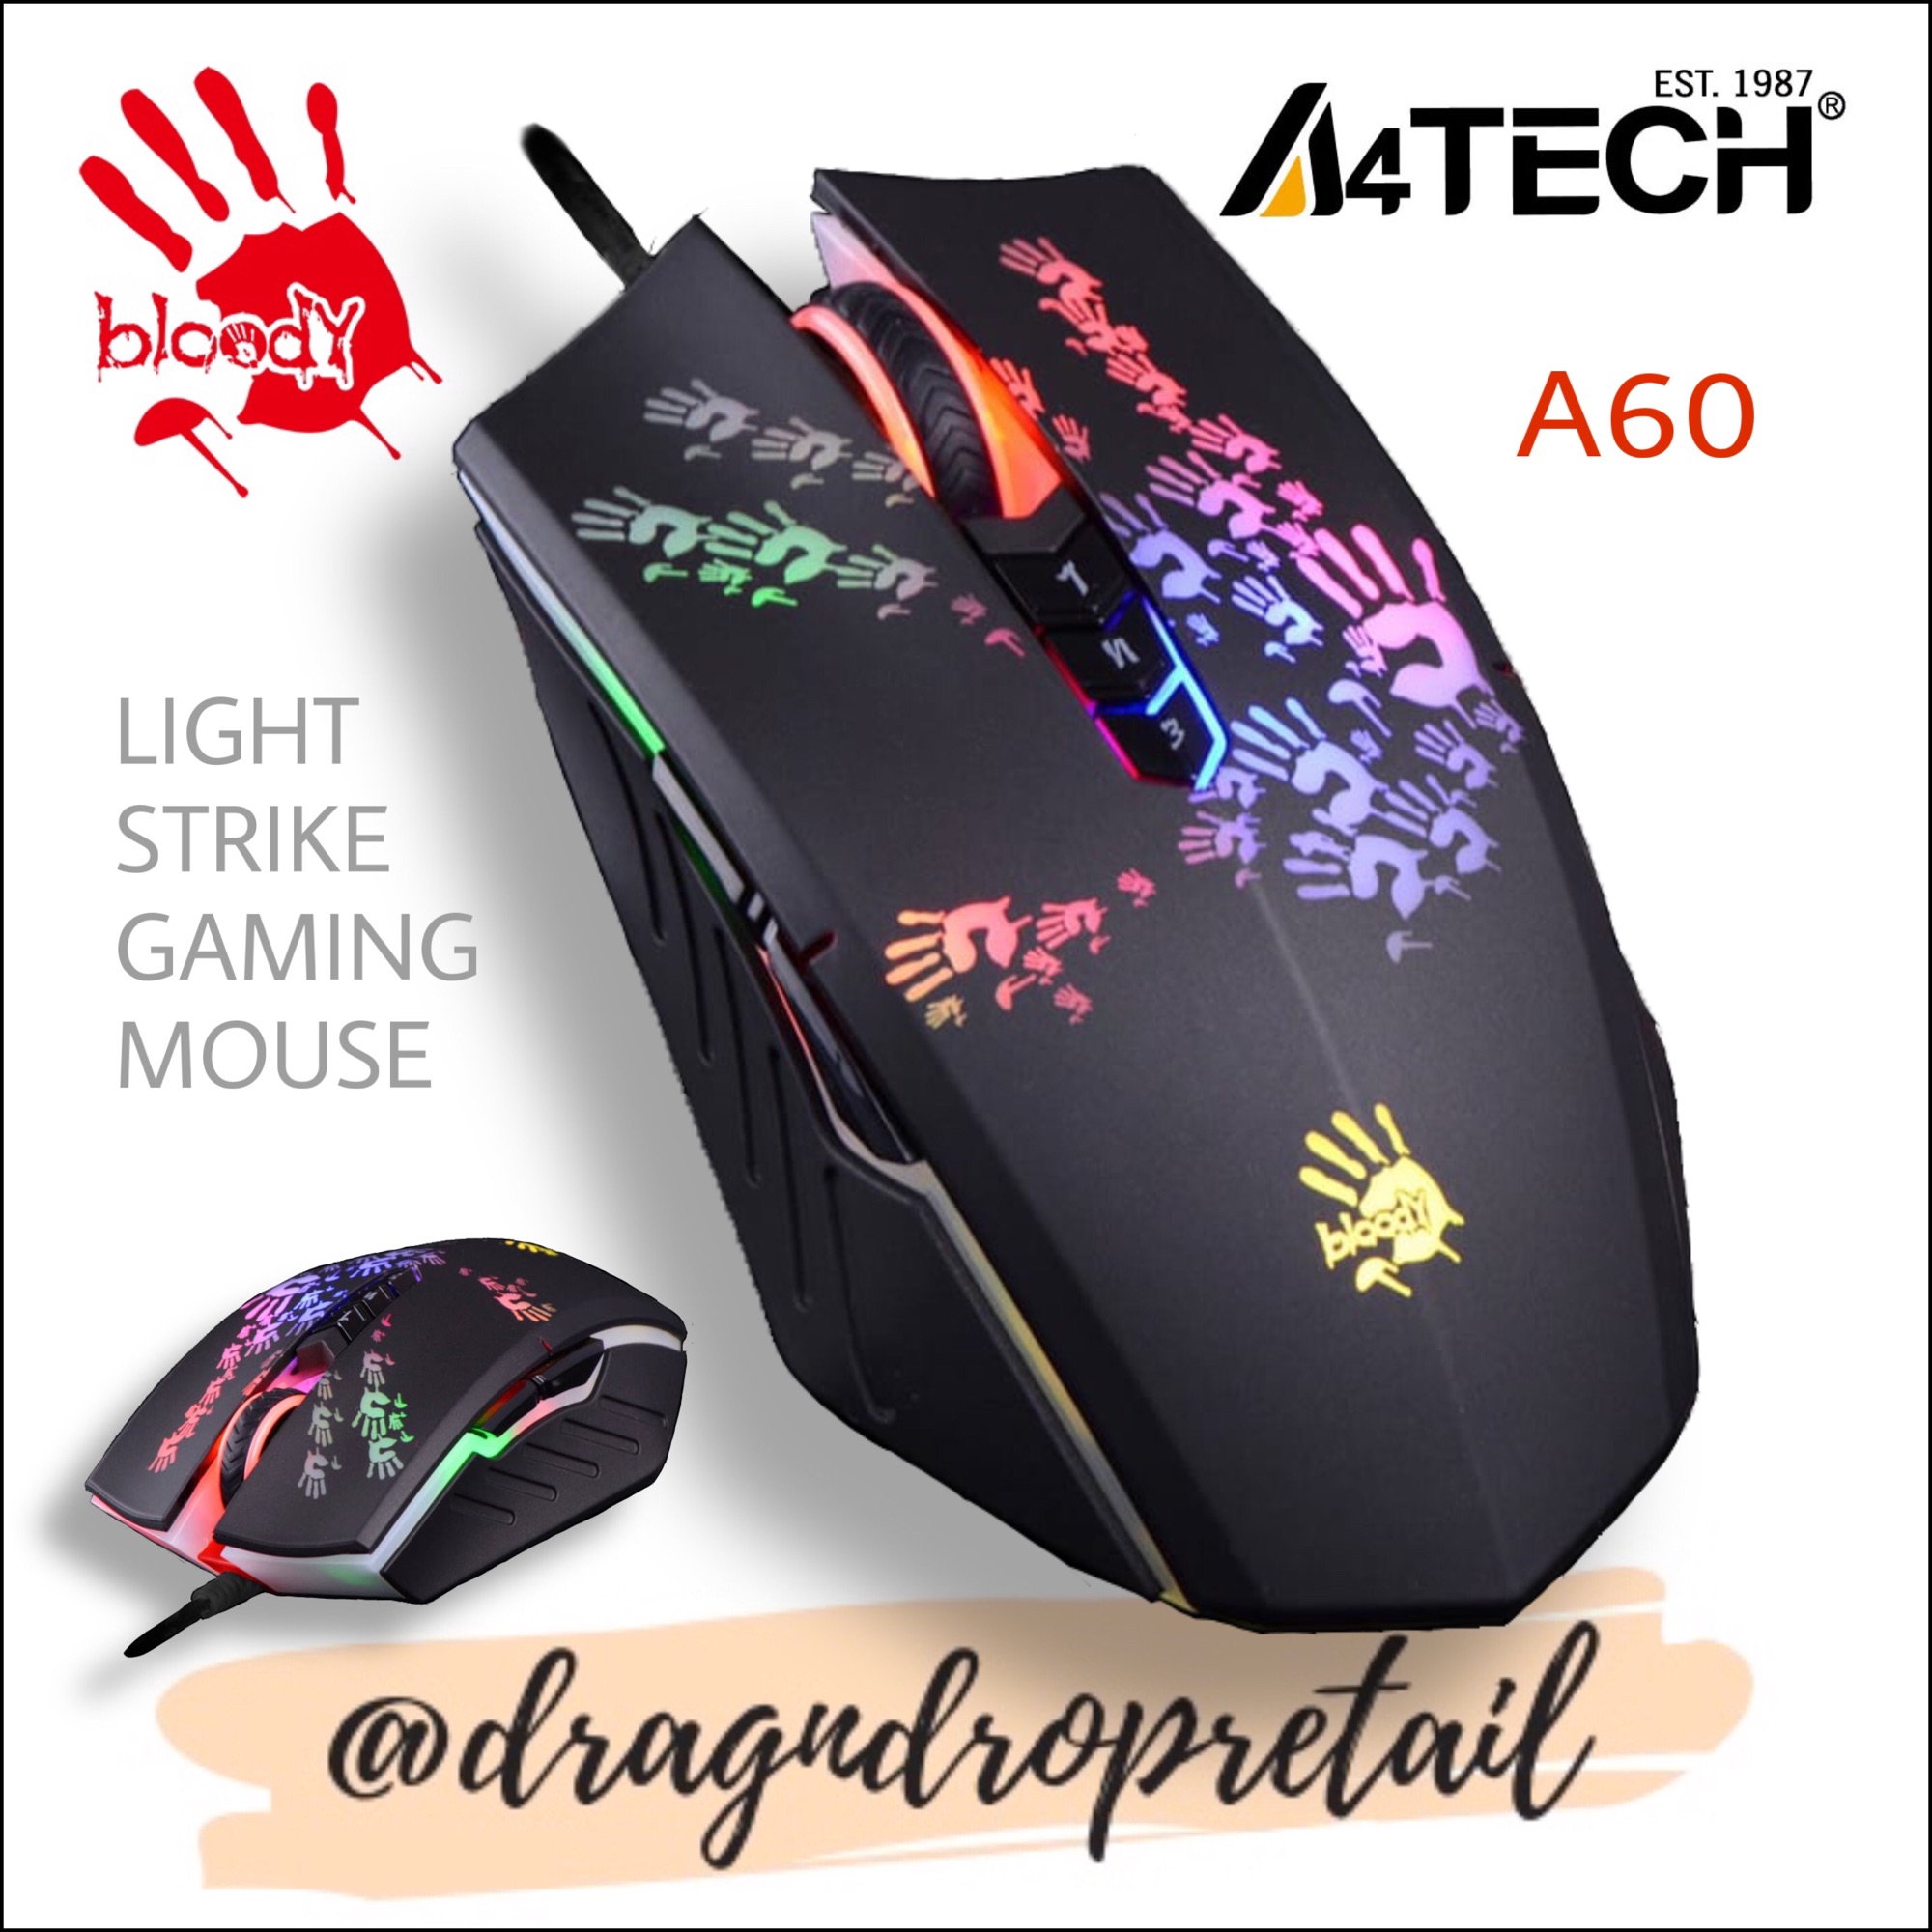 Bloody a60 Mouse. Mouse a4tech Bloody Gaming Light Strike a60 Metal x'Glide Pro Boots USB. Bloody a60 Drag click. Bloody a60 подходит для драг клика. Blacklisted device bloody mouse